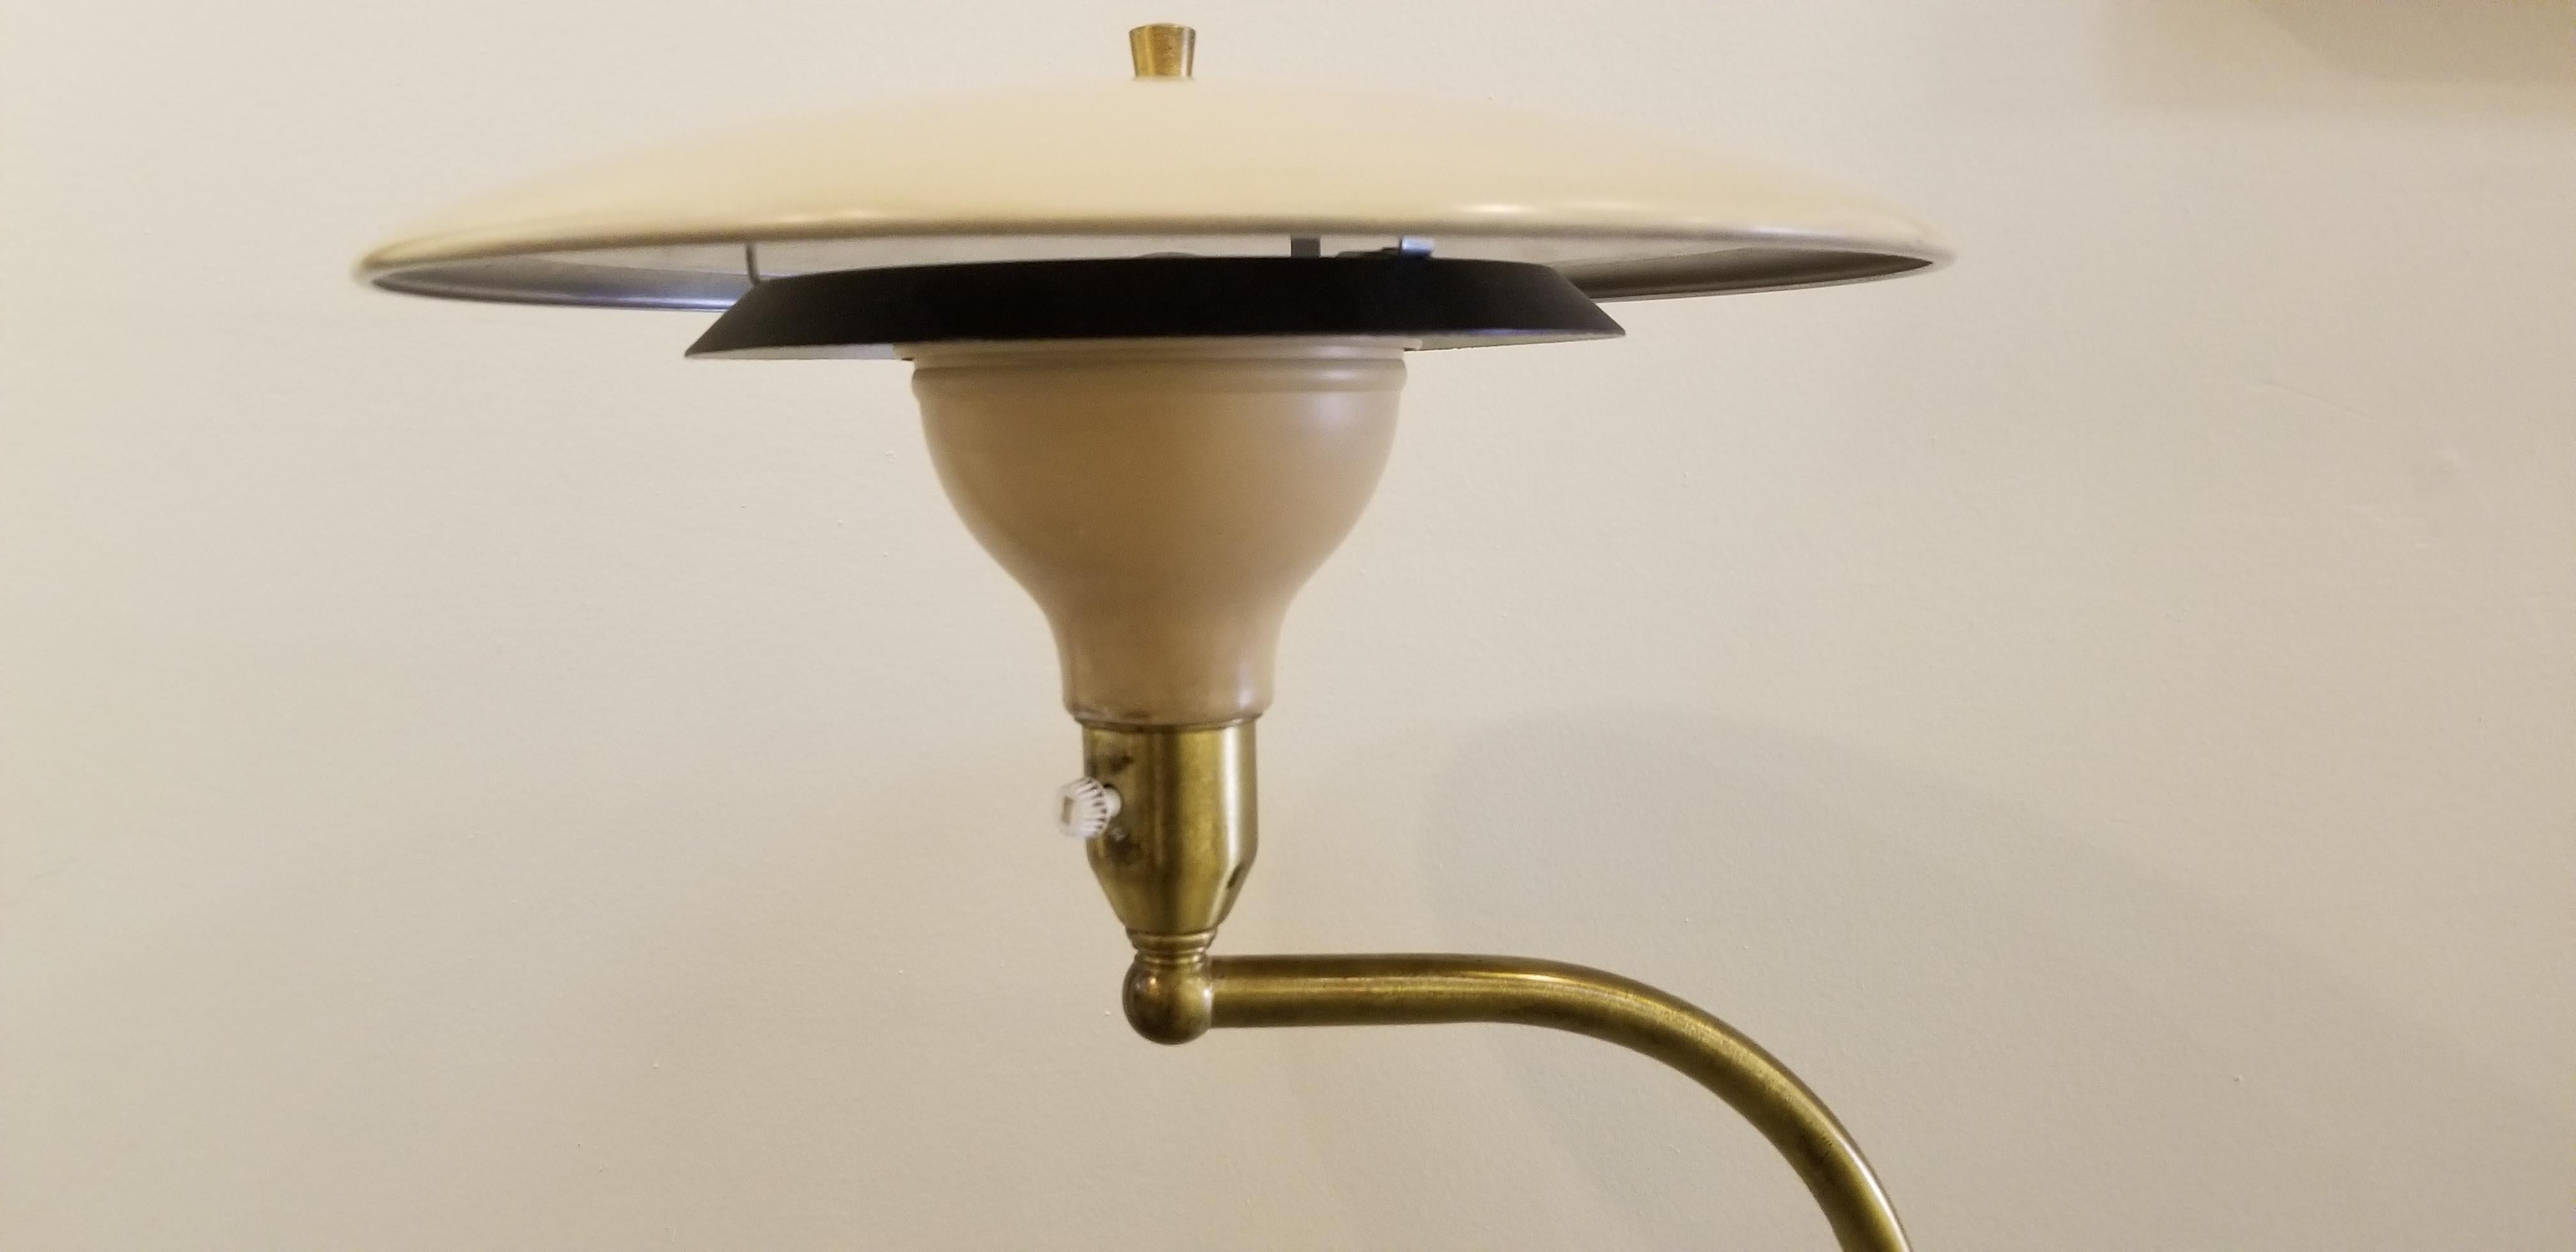 A Mid-Century Modern adjustable floor lamp by M. G. Wheeler Co., circa 1960s. Flying saucer design to metal shade. Lamp pivots and height adjusts. Original condition with original painted aluminum and metal. Retains makers label.